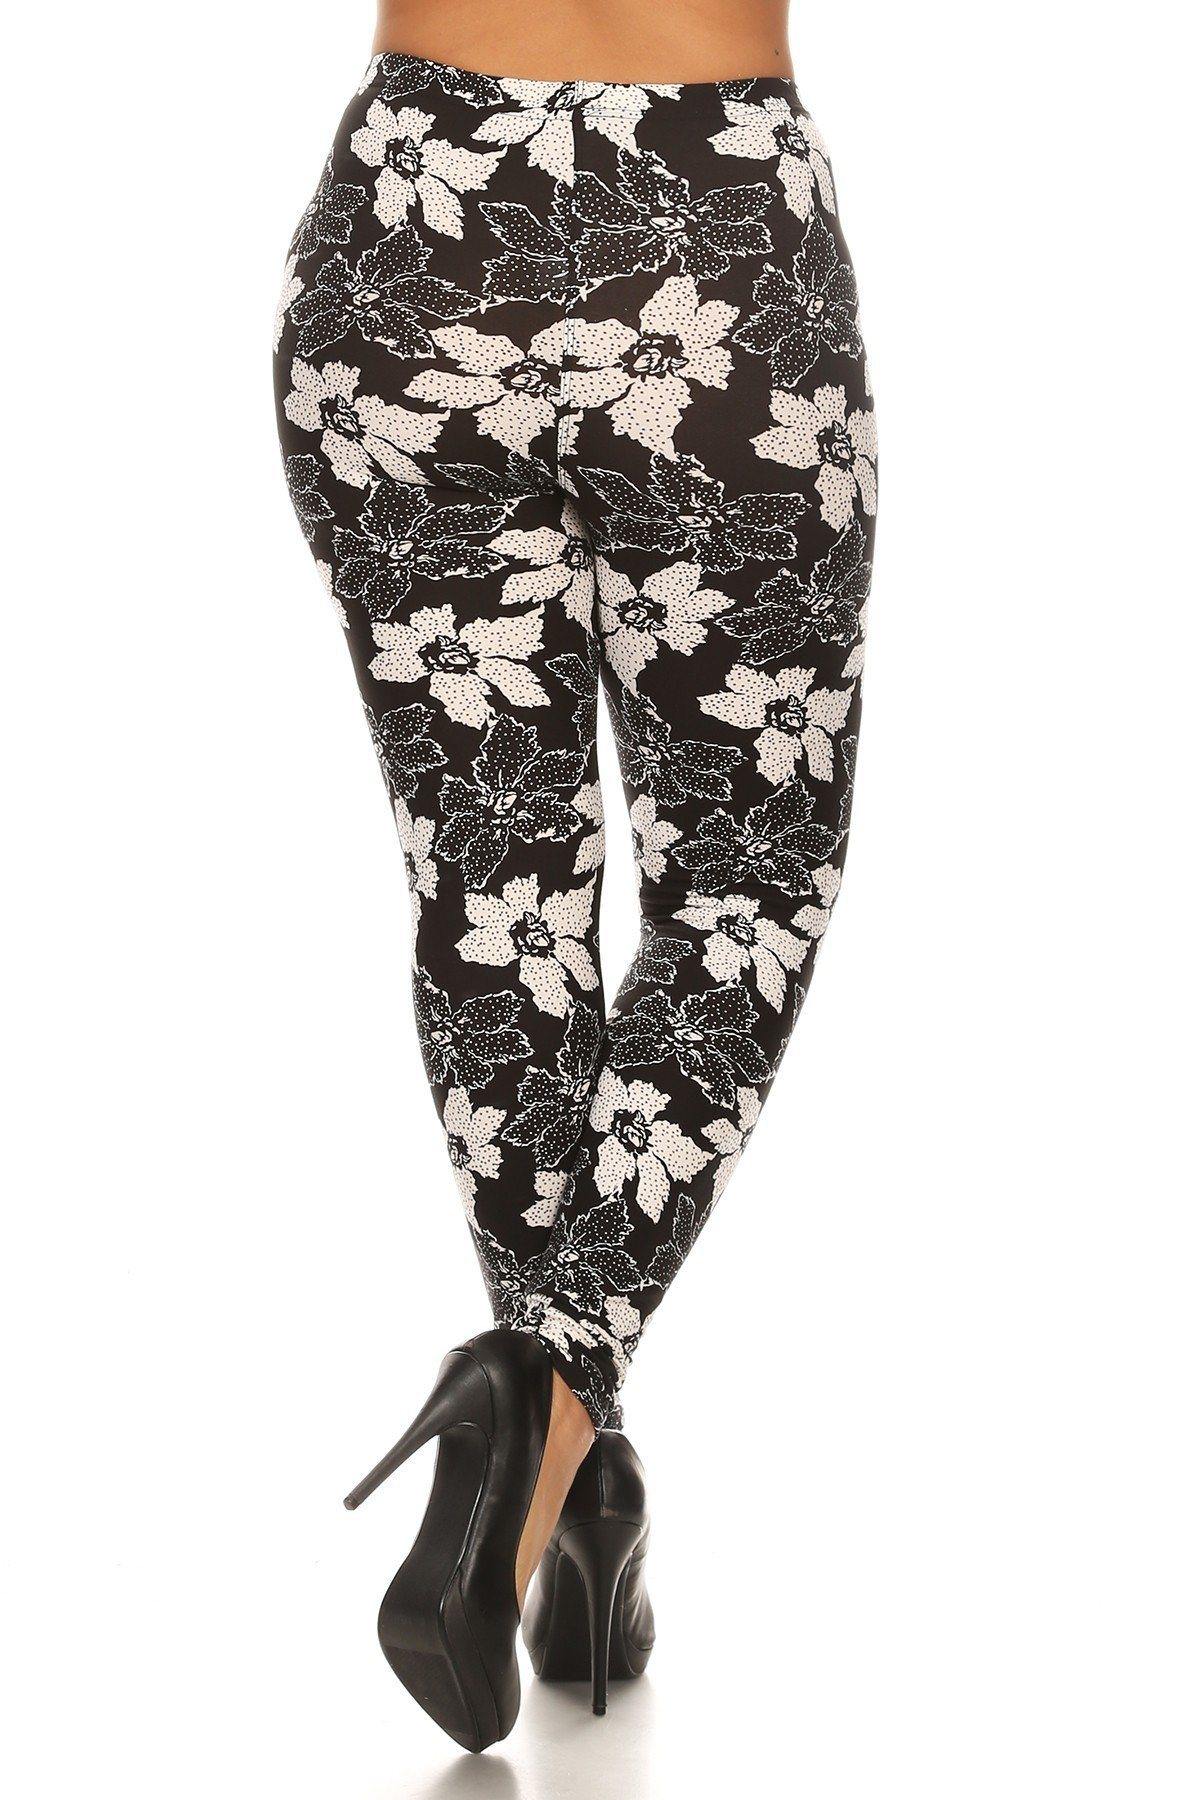 Plus Size Floral Pattern Printed Knit Legging With Elastic Waistband - Pearlara